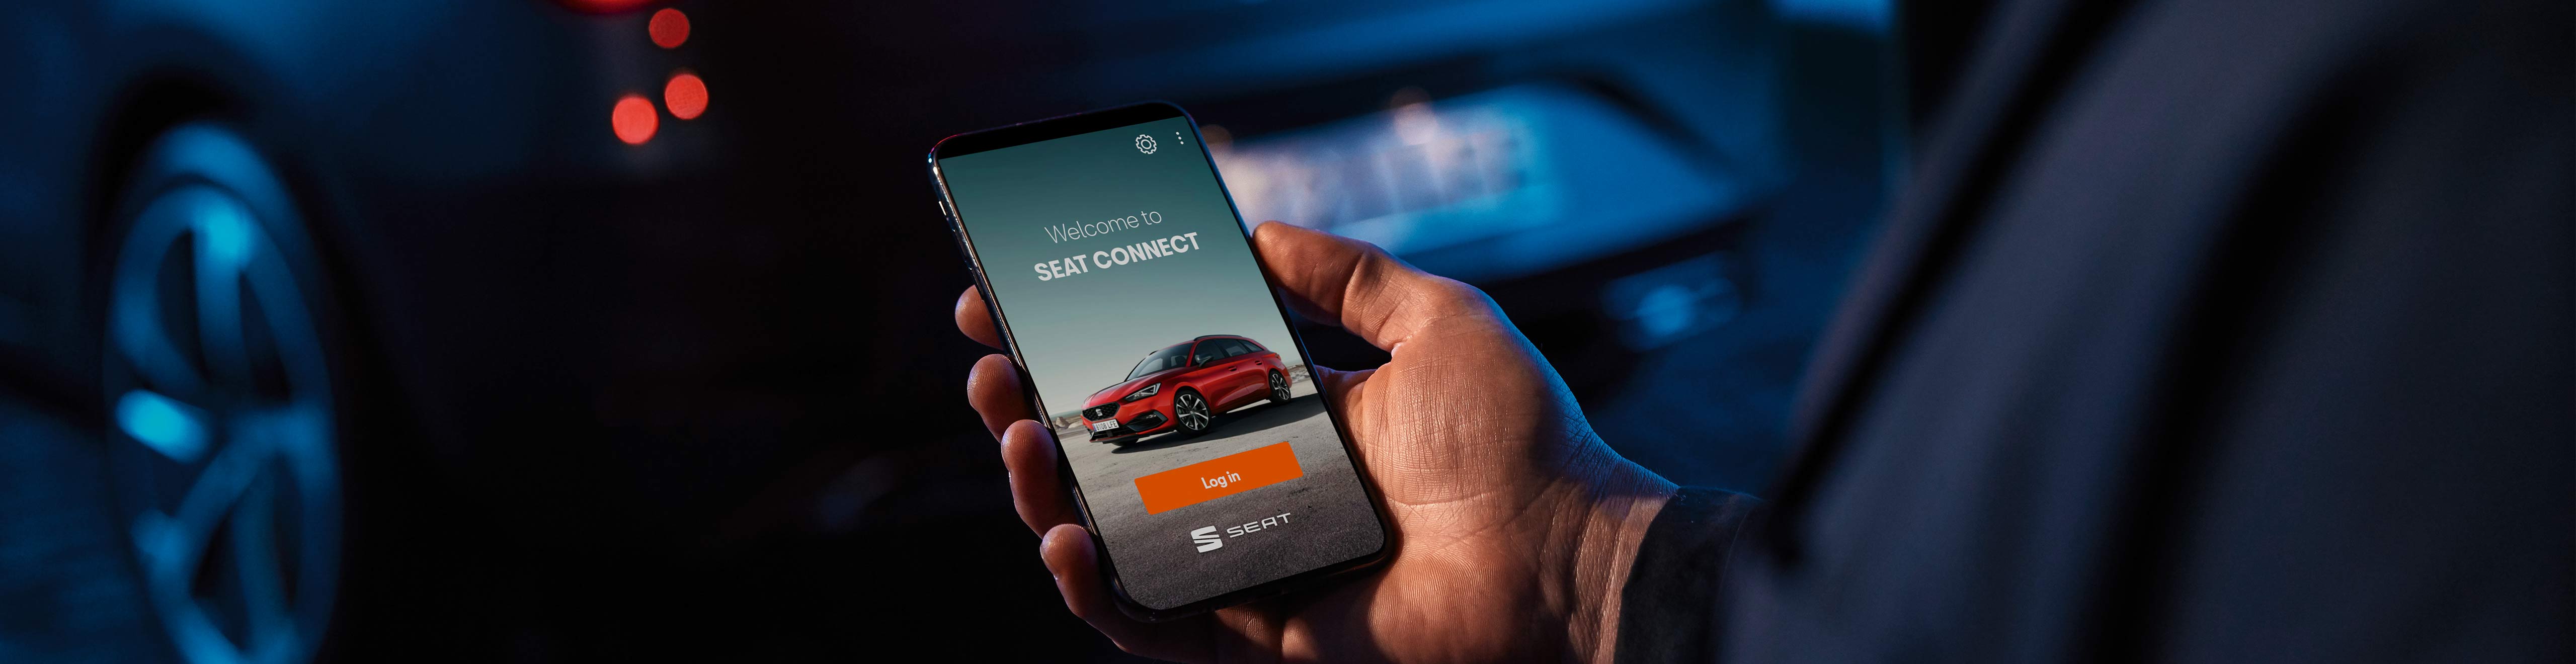 man-with-phone-seat-connect-app-welcome-screen